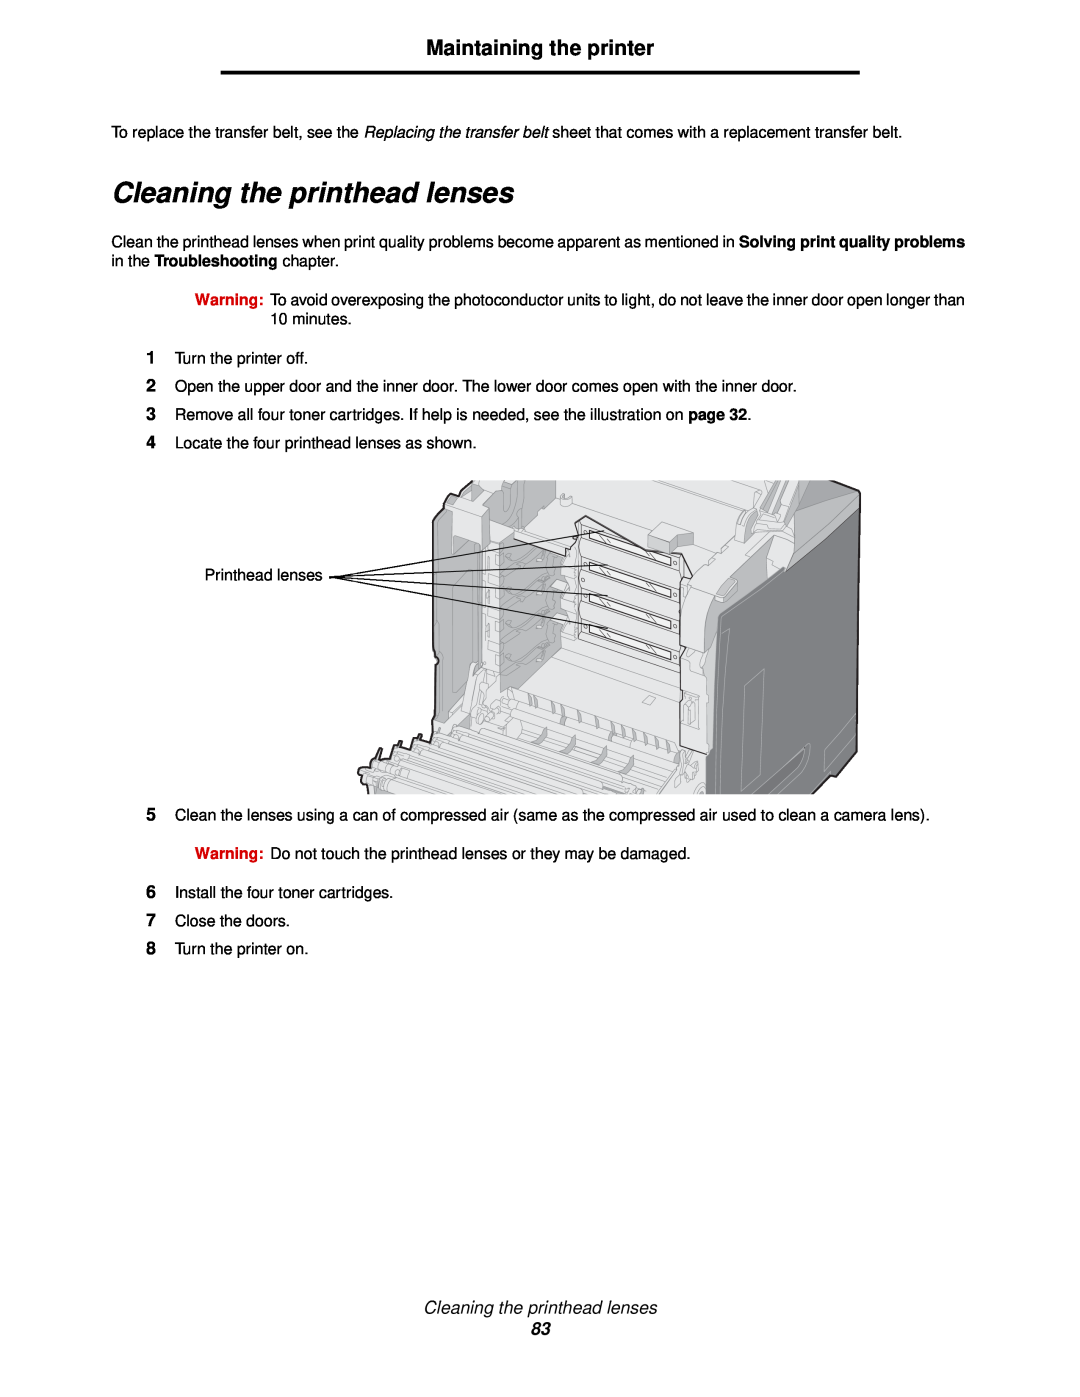 Lexmark C522, C524, C520 manual Cleaning the printhead lenses, Maintaining the printer 